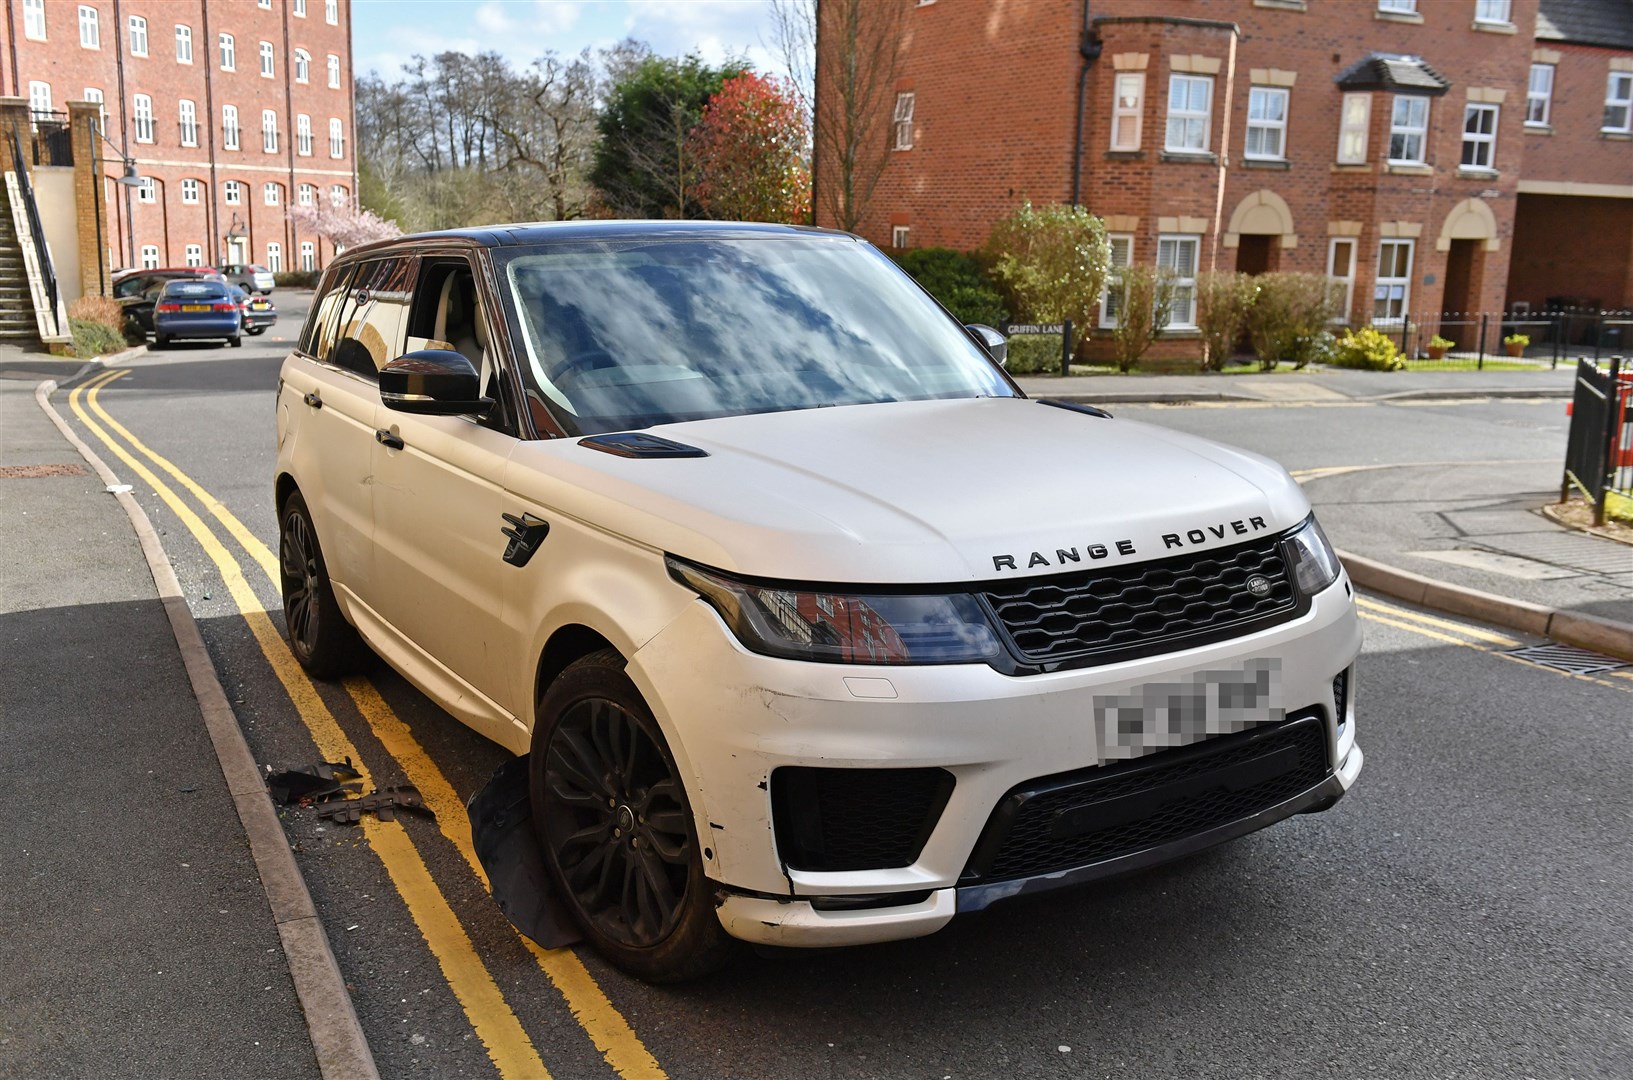 Jack Grealish crashed his white Range Rover into parked cars in the Dickens Heath area of Solihull during the first national lockdown (Jacob King/PA)